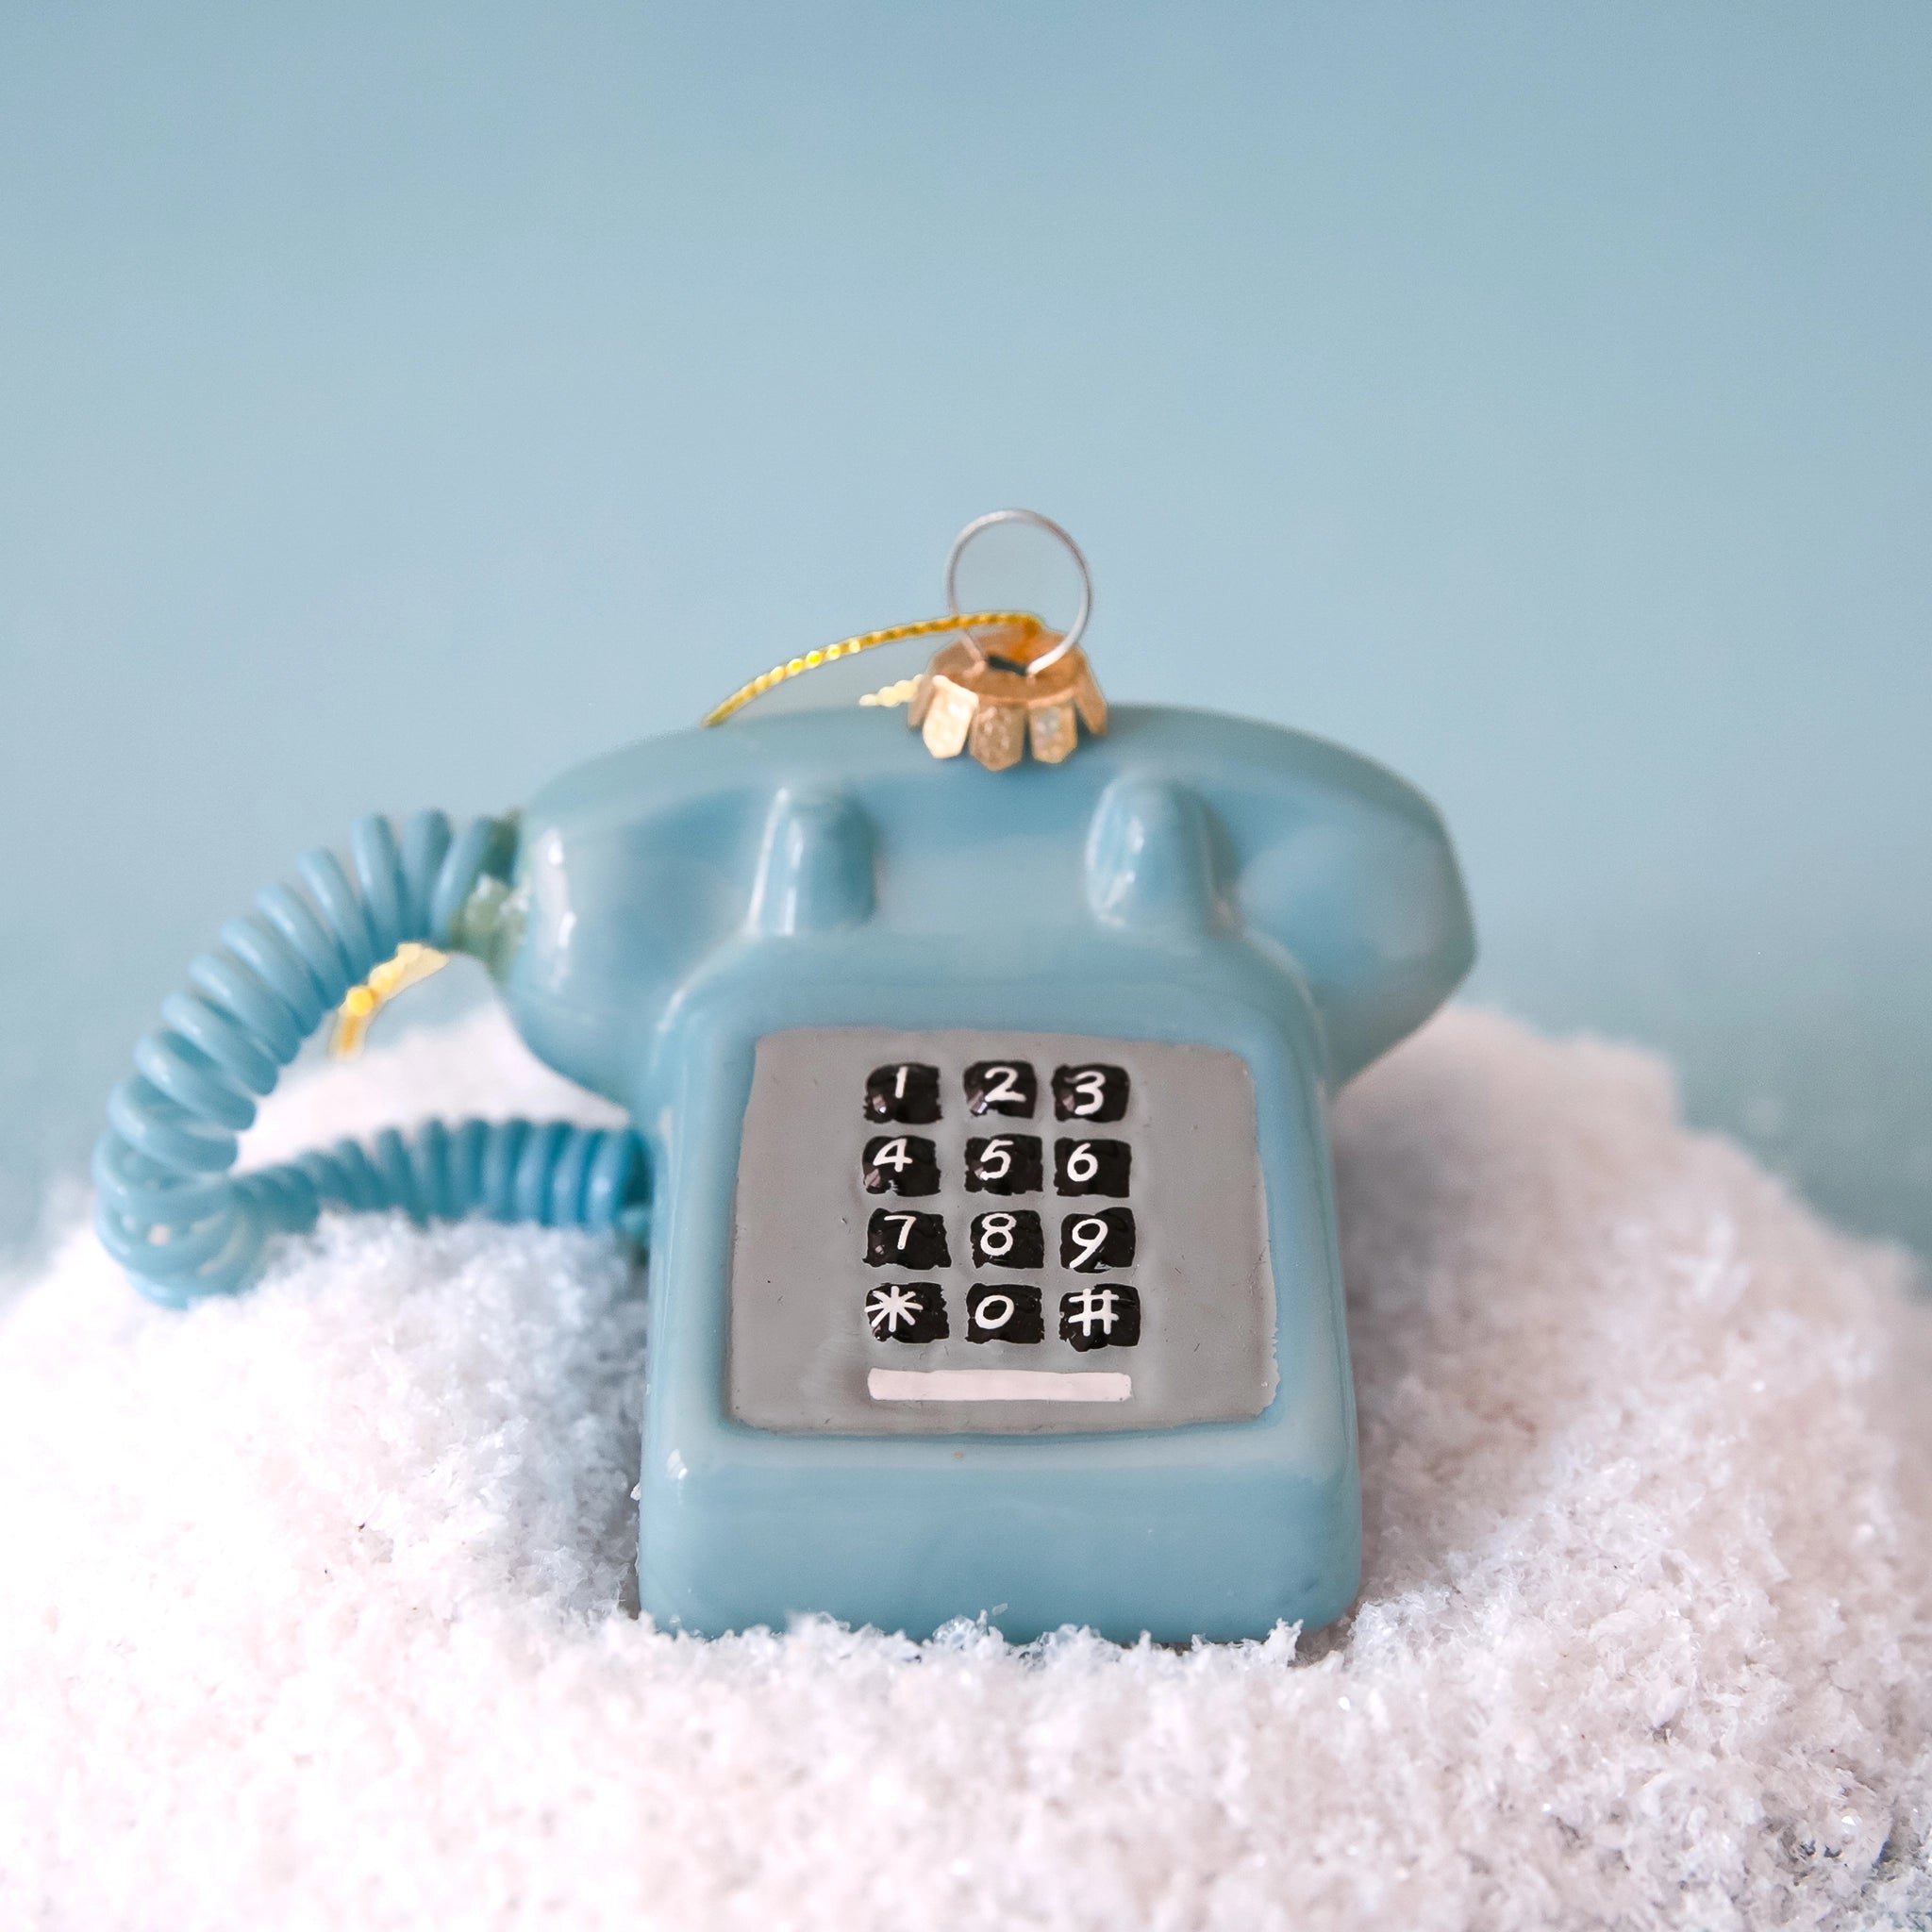 A glass touch tone phone ornament in a shiny blue shade on a snowy blue backdrop.